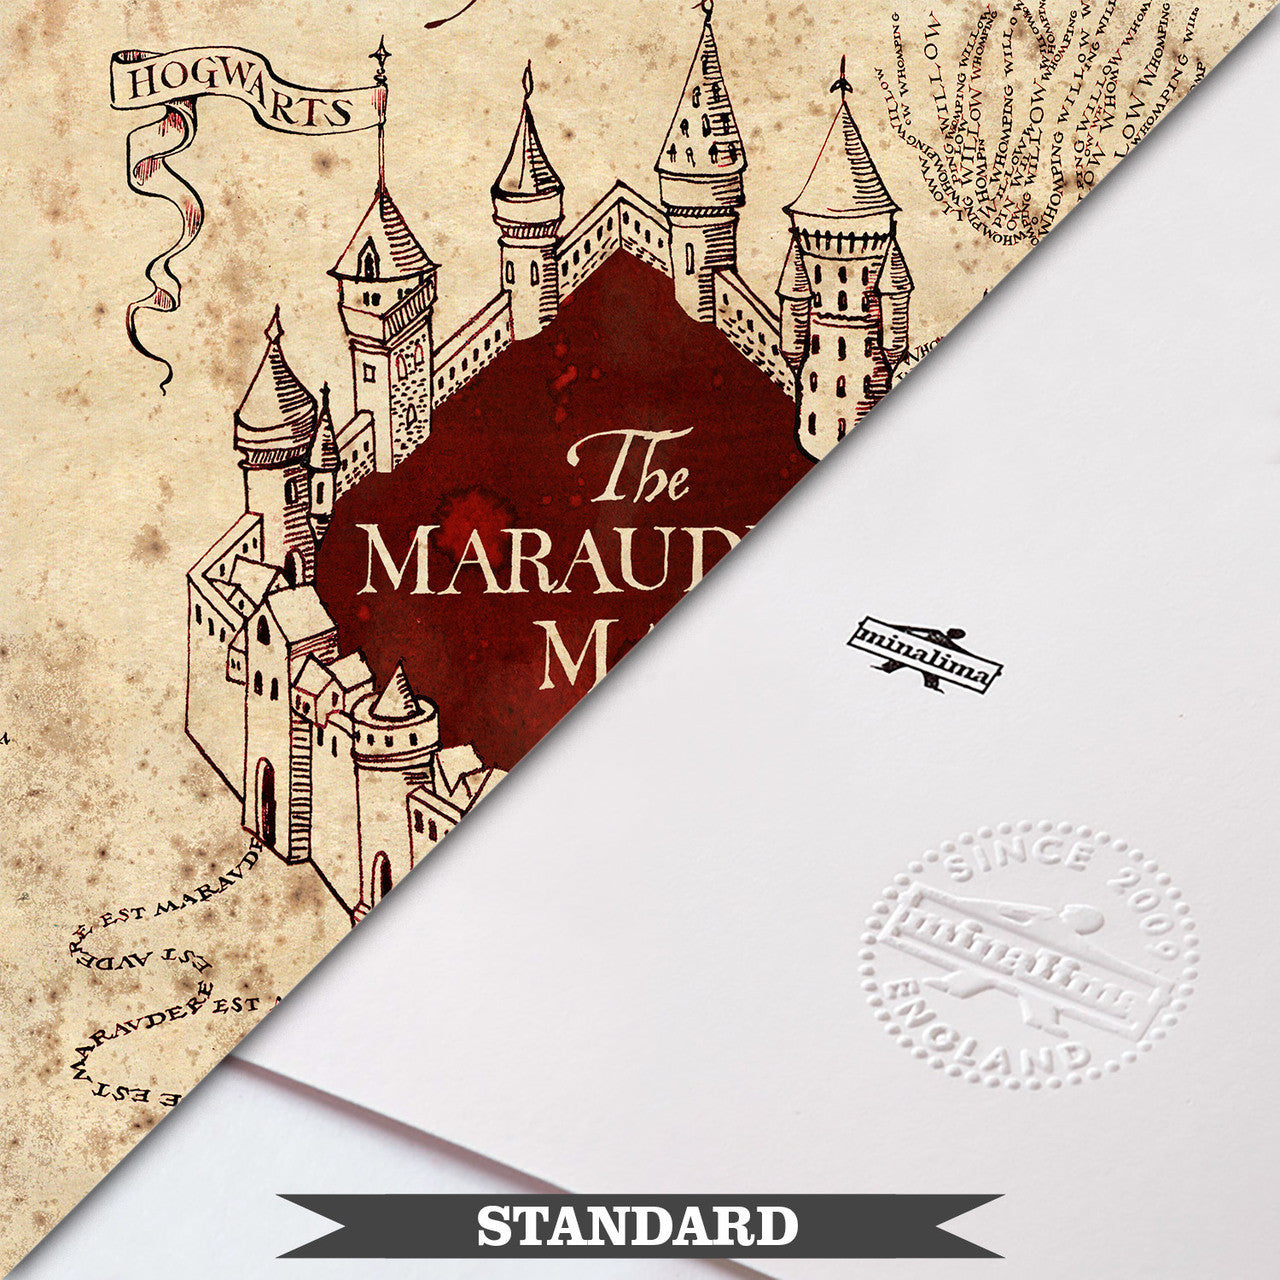 The Marauders' Map Guide - Scholastic/ Warner Brothers :: Behance